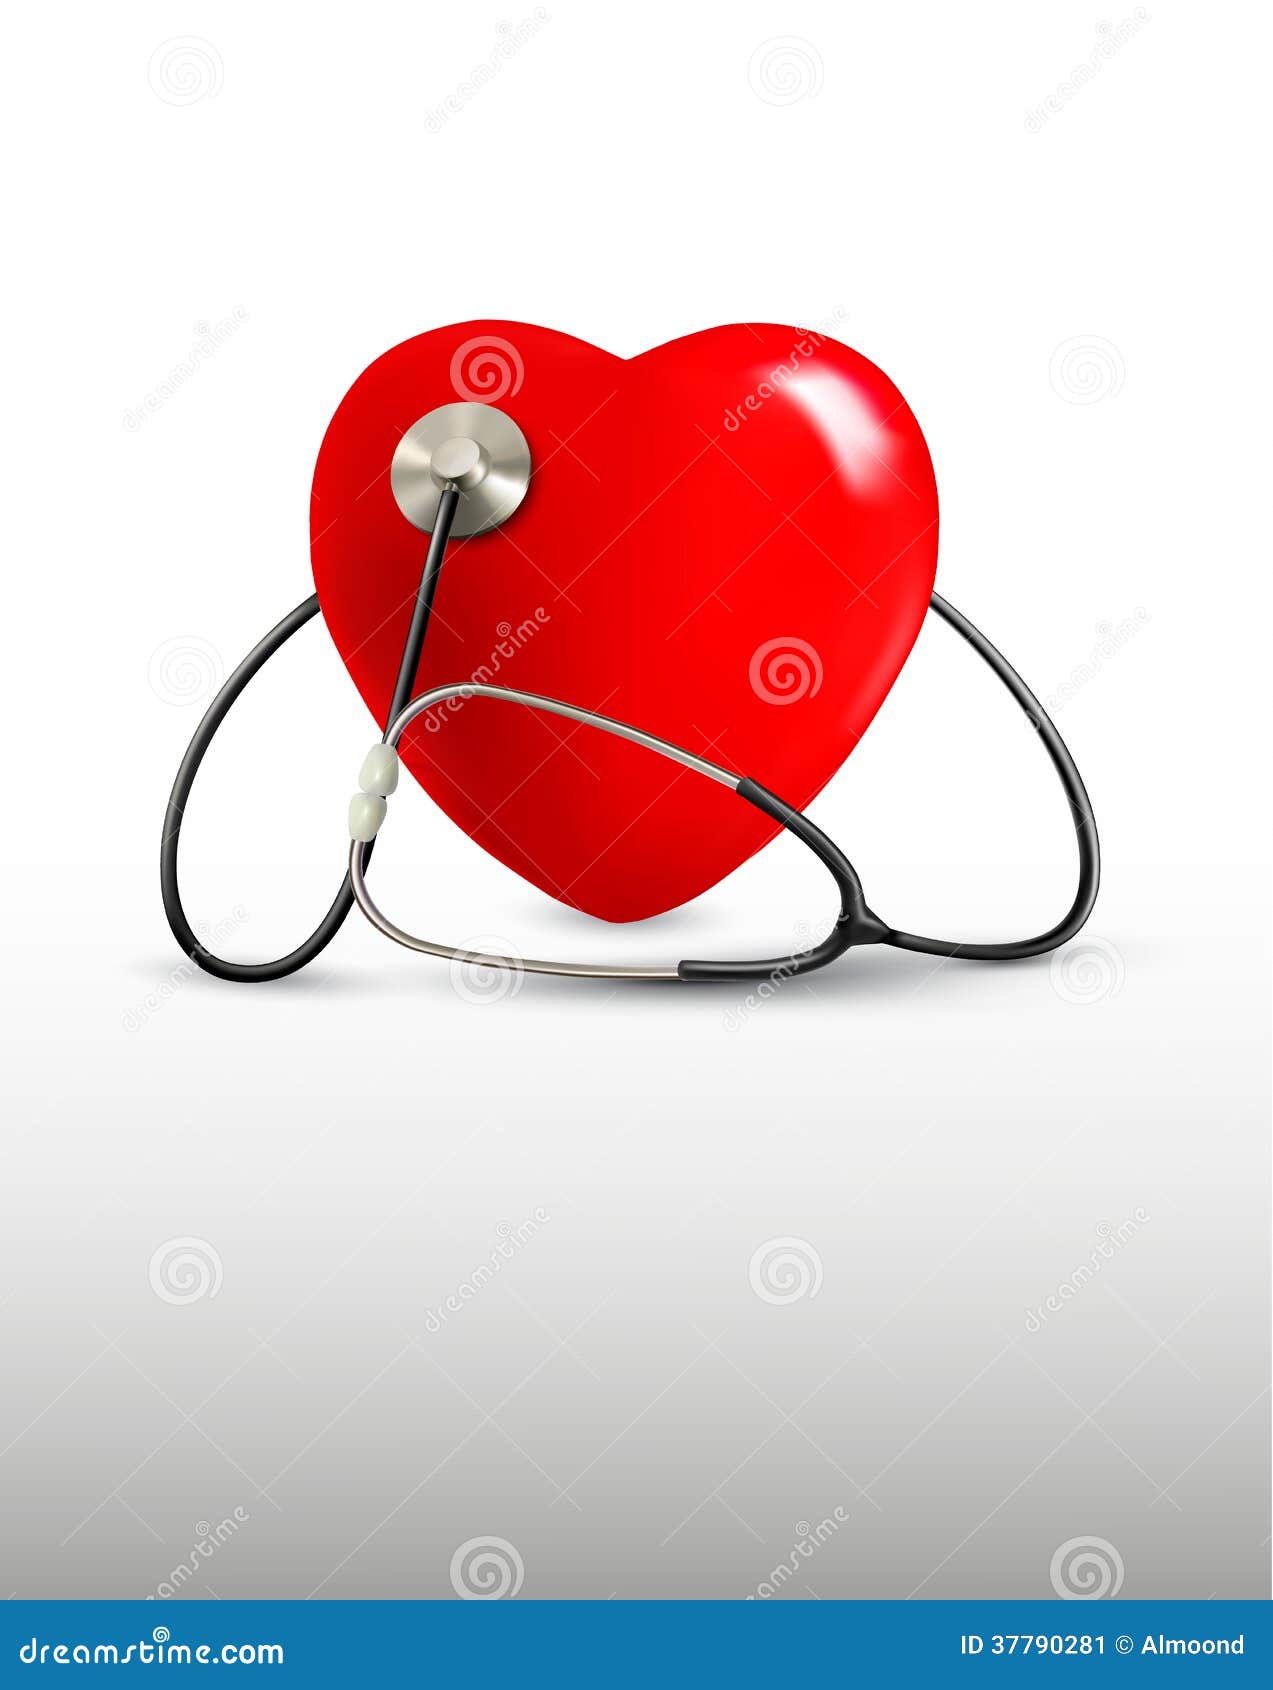 background with a stethoscope and a heart.